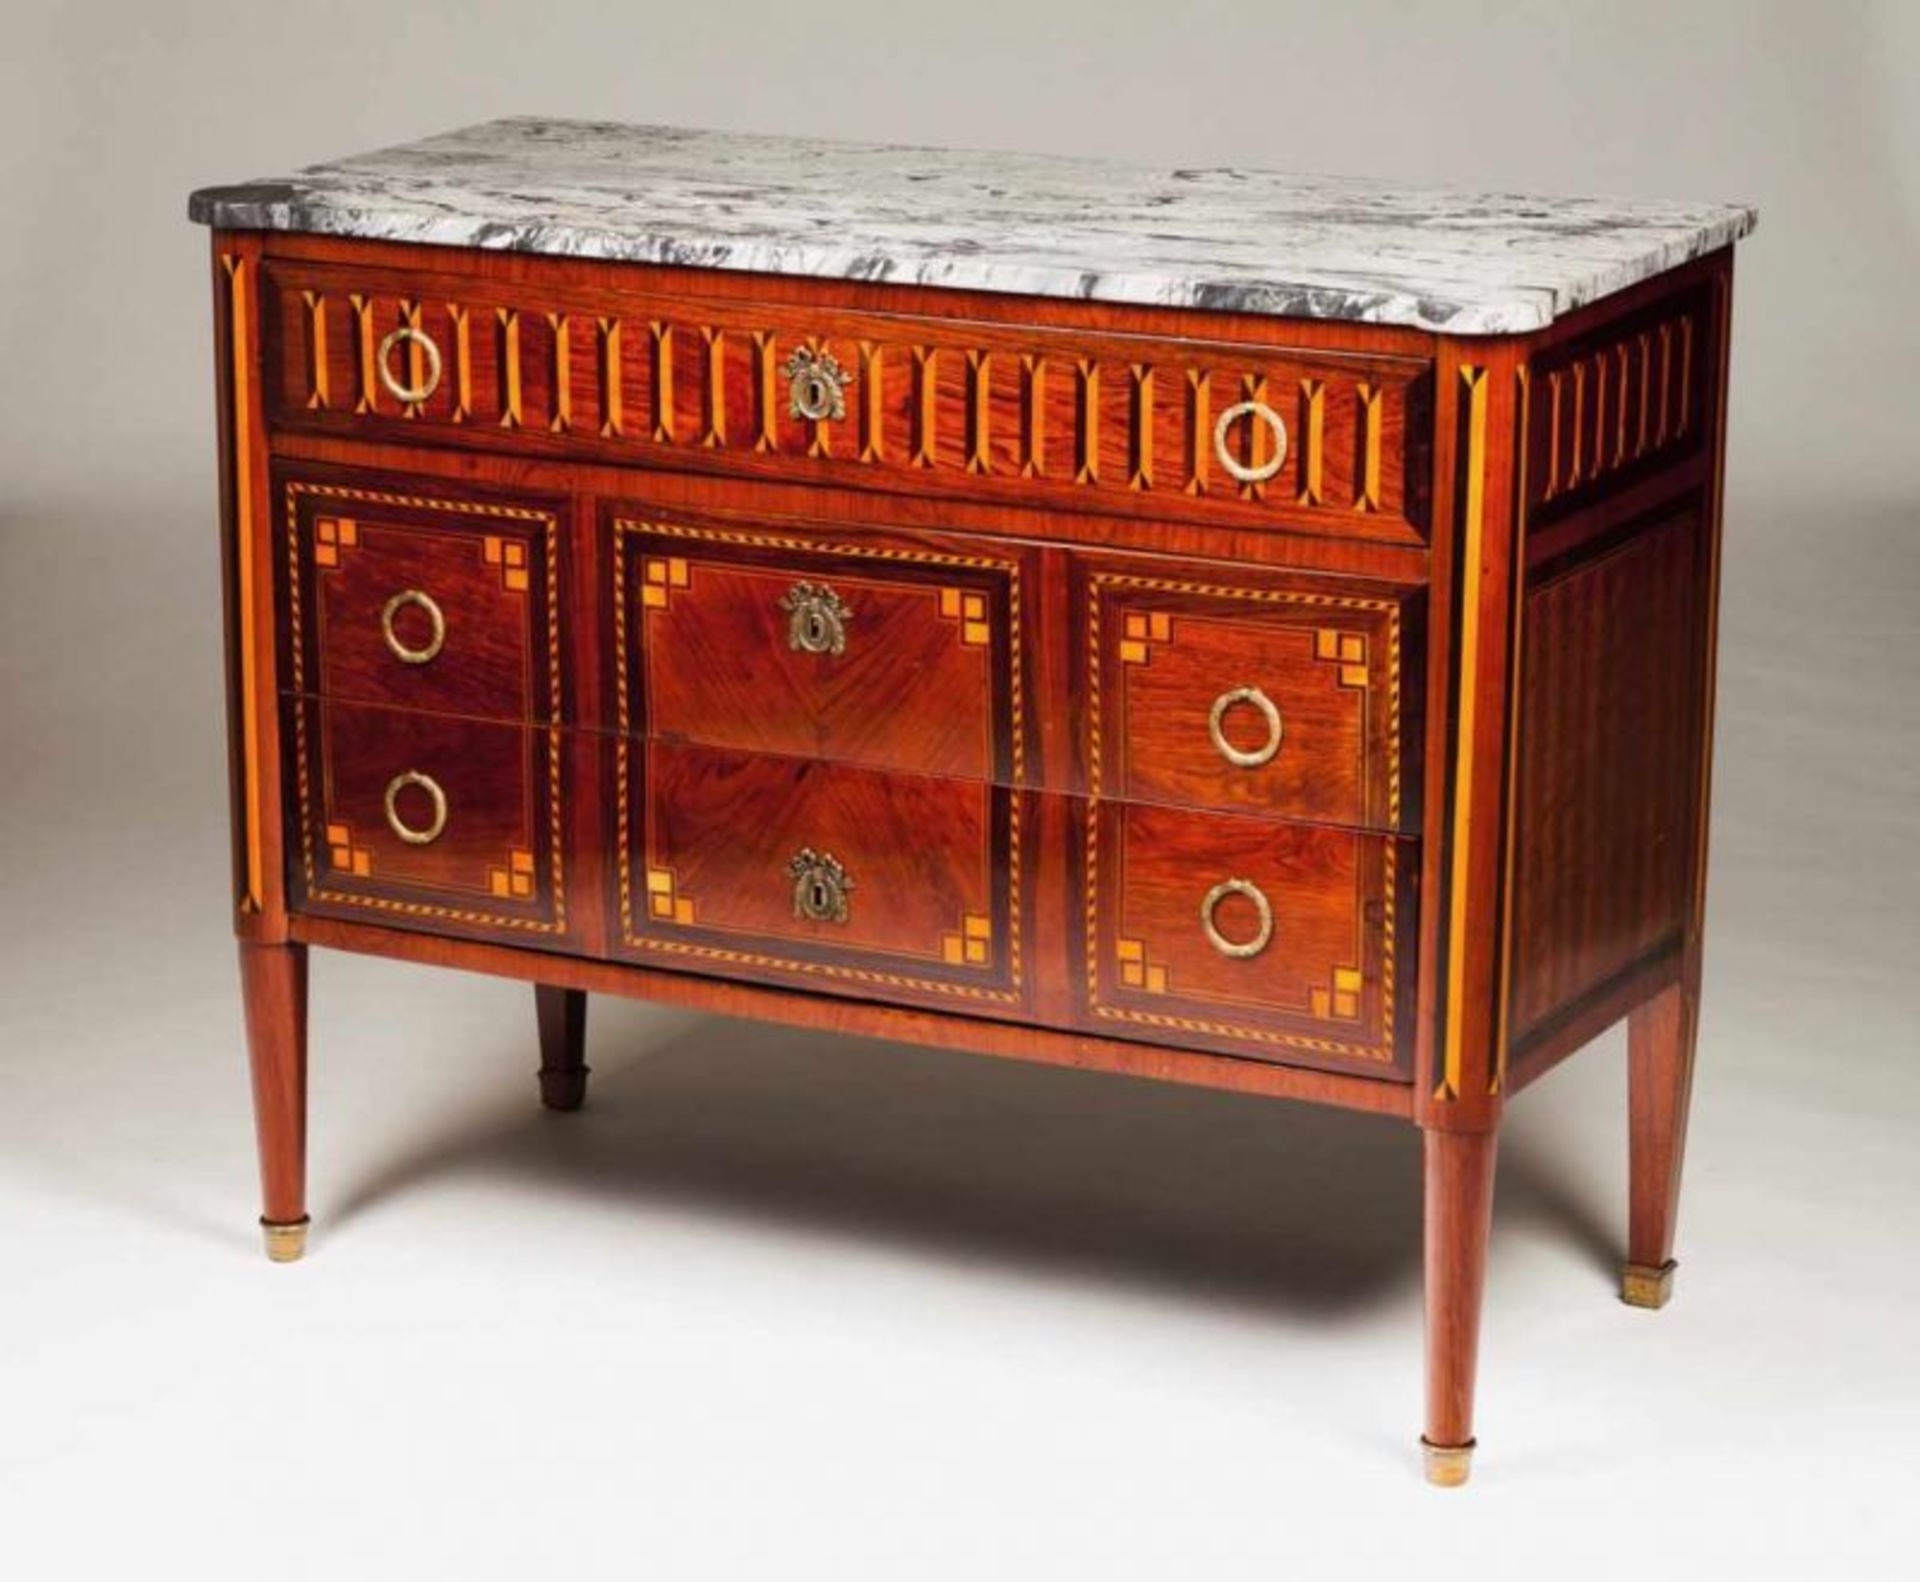 A D. Maria style commode Rosewood veneered wood, thornbush inlays Three long drawers and brass